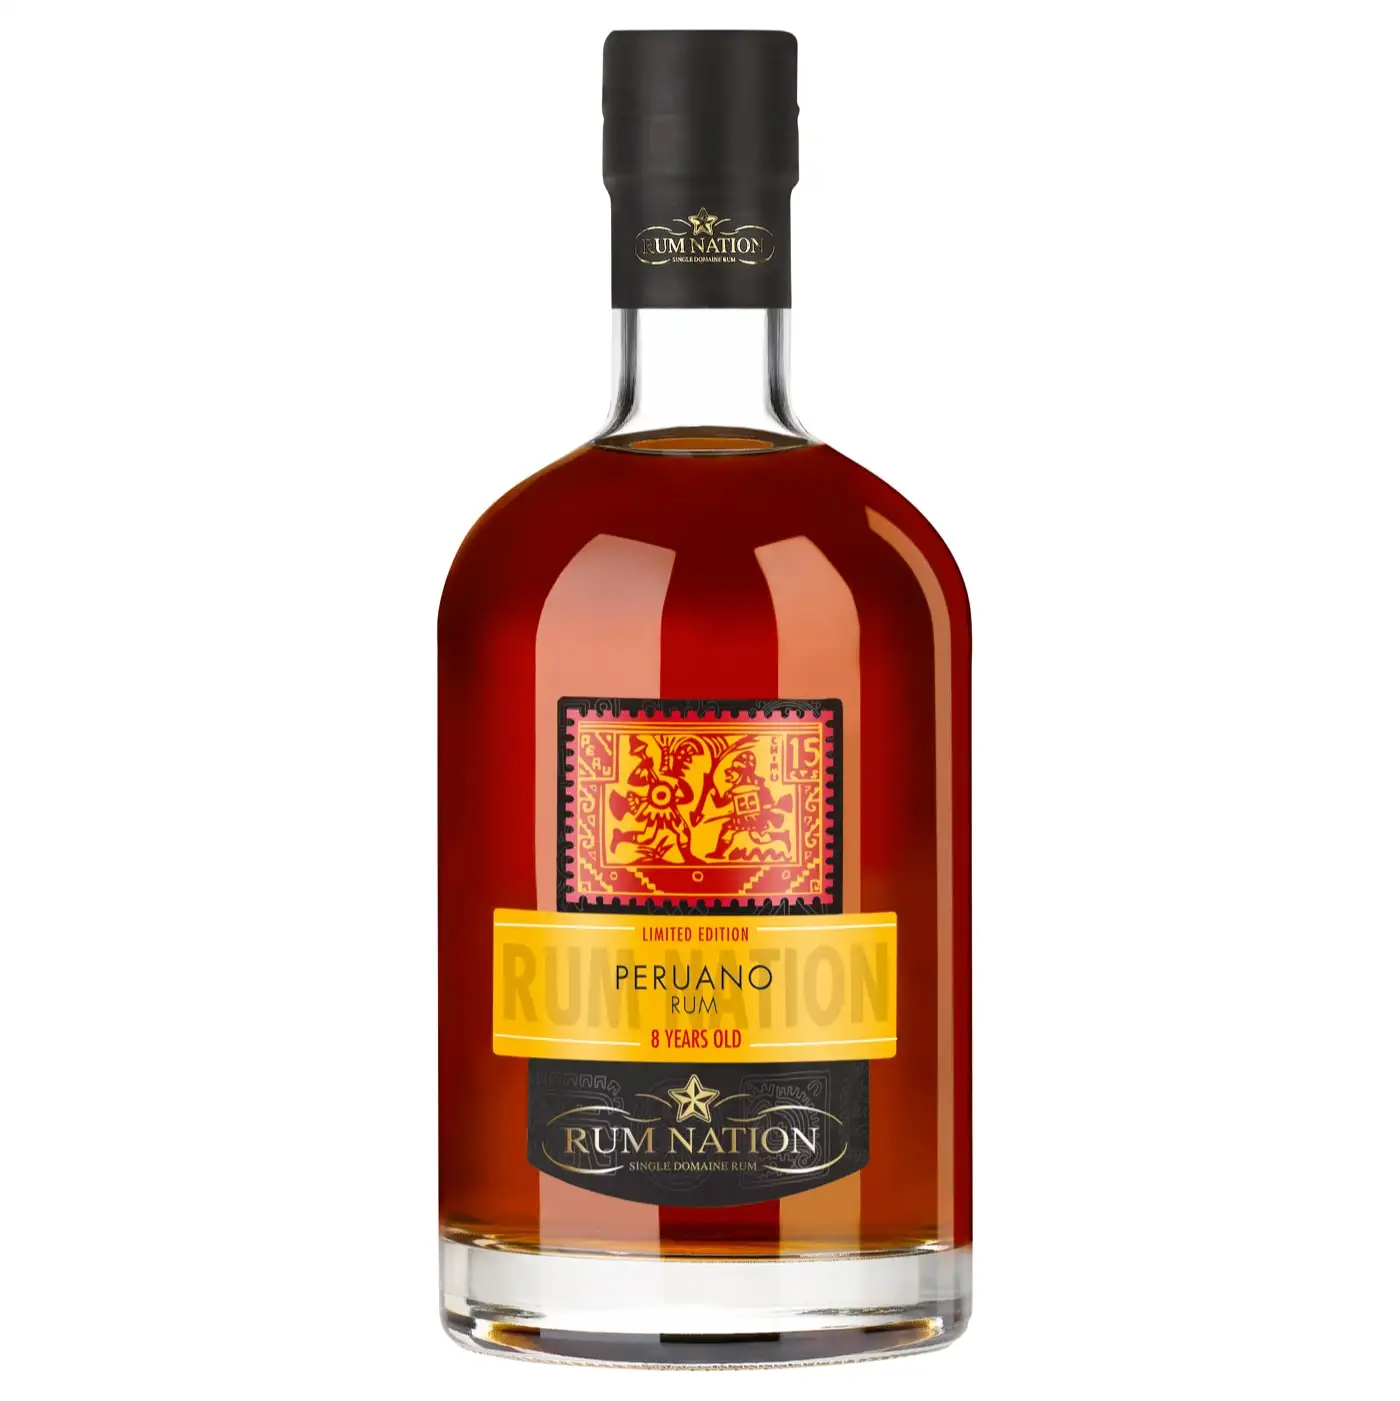 Image of the front of the bottle of the rum Peruano Limited Edition 2017